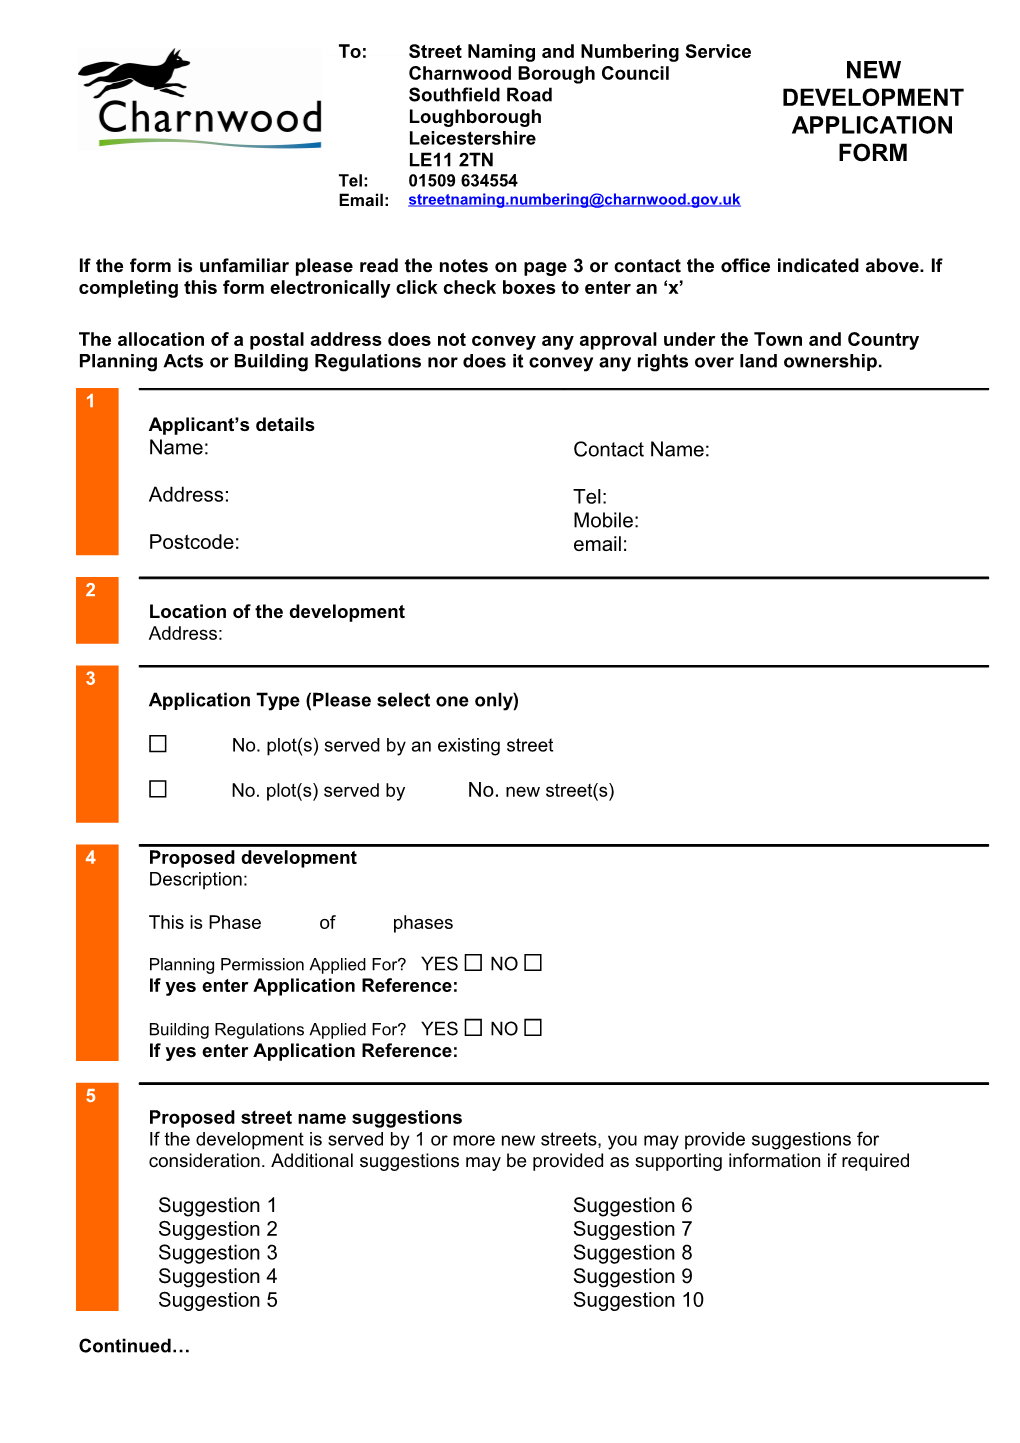 If the Form Is Unfamiliar Please Read the Notes on Page 3 Or Contact the Office Indicated